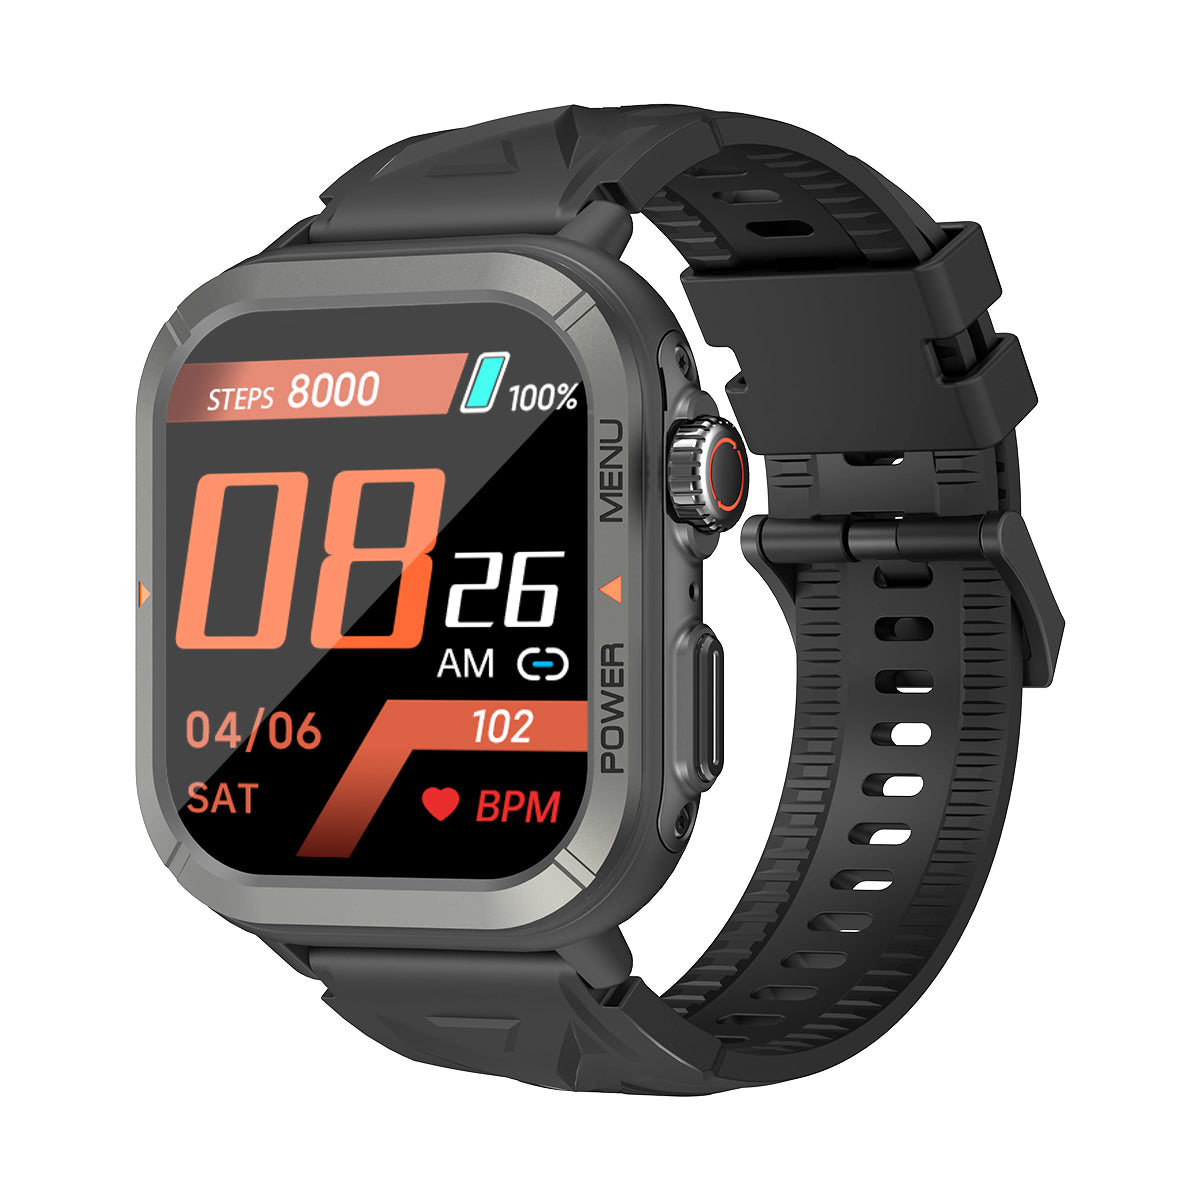 Blackview W30 10-meter Water-resistance Cool Smartwatch - Blackview Global  – Blackview Official Store